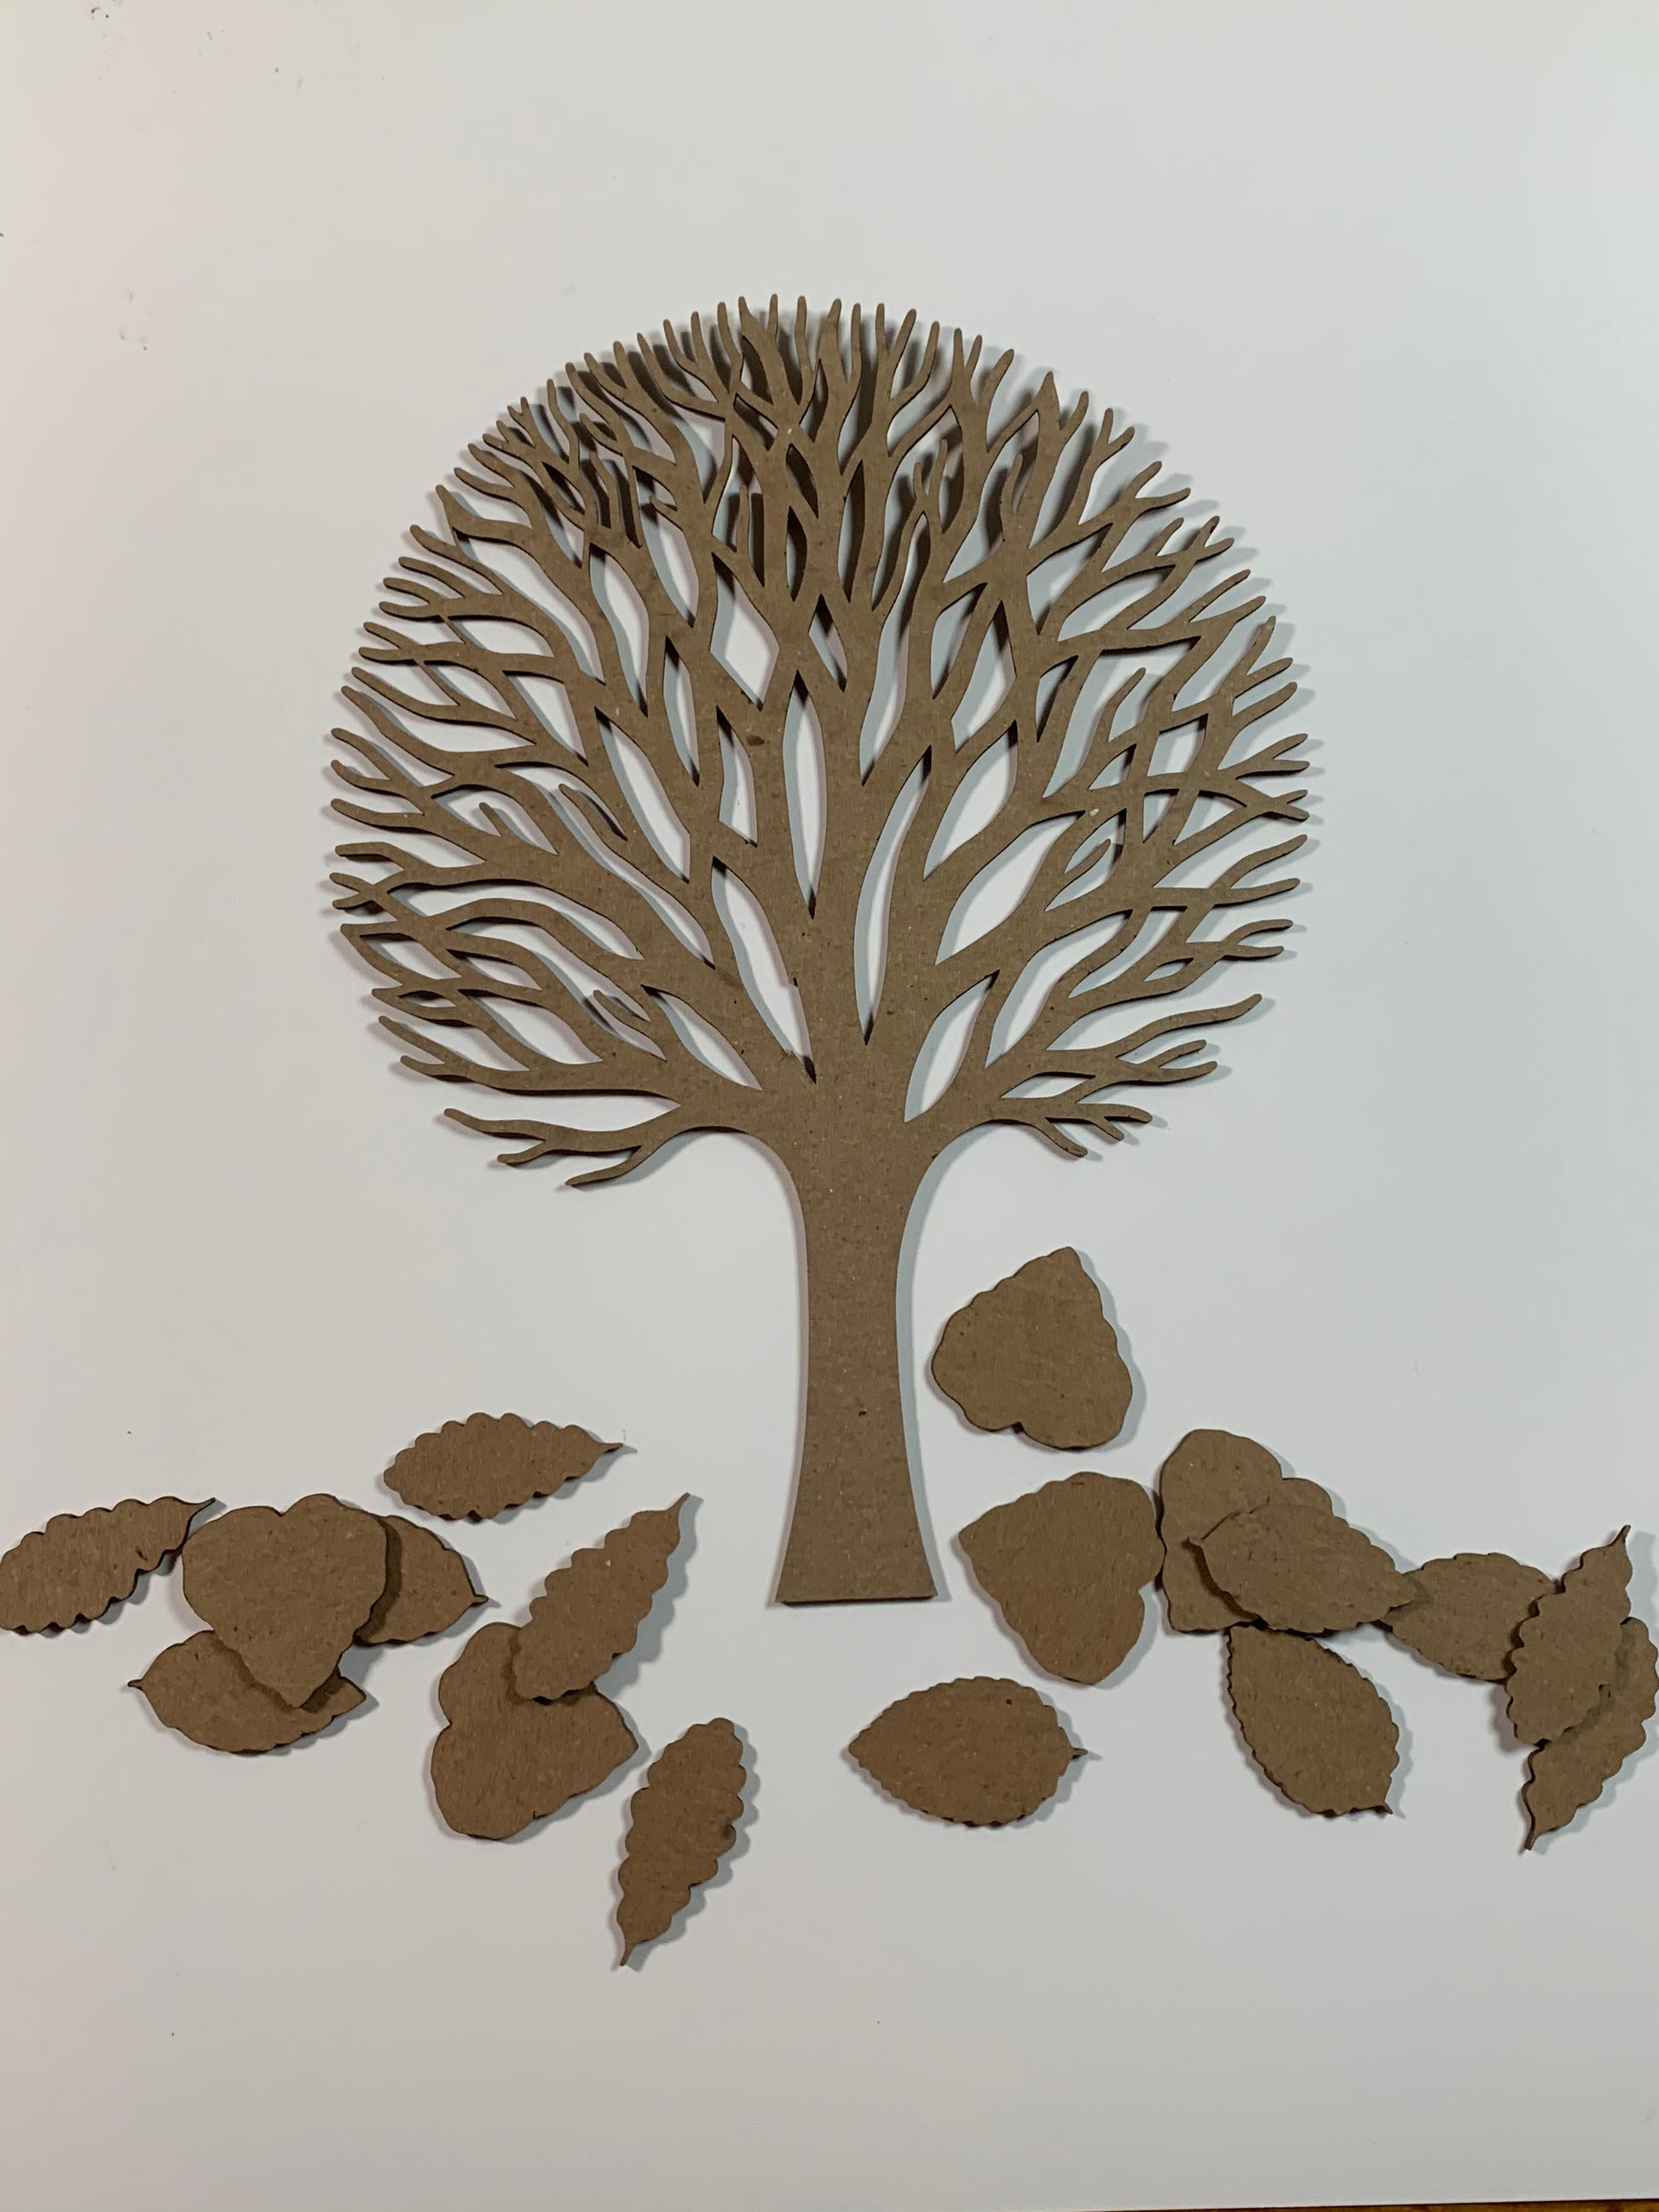 Tree with fallen leaves - Creative Designs By Kari